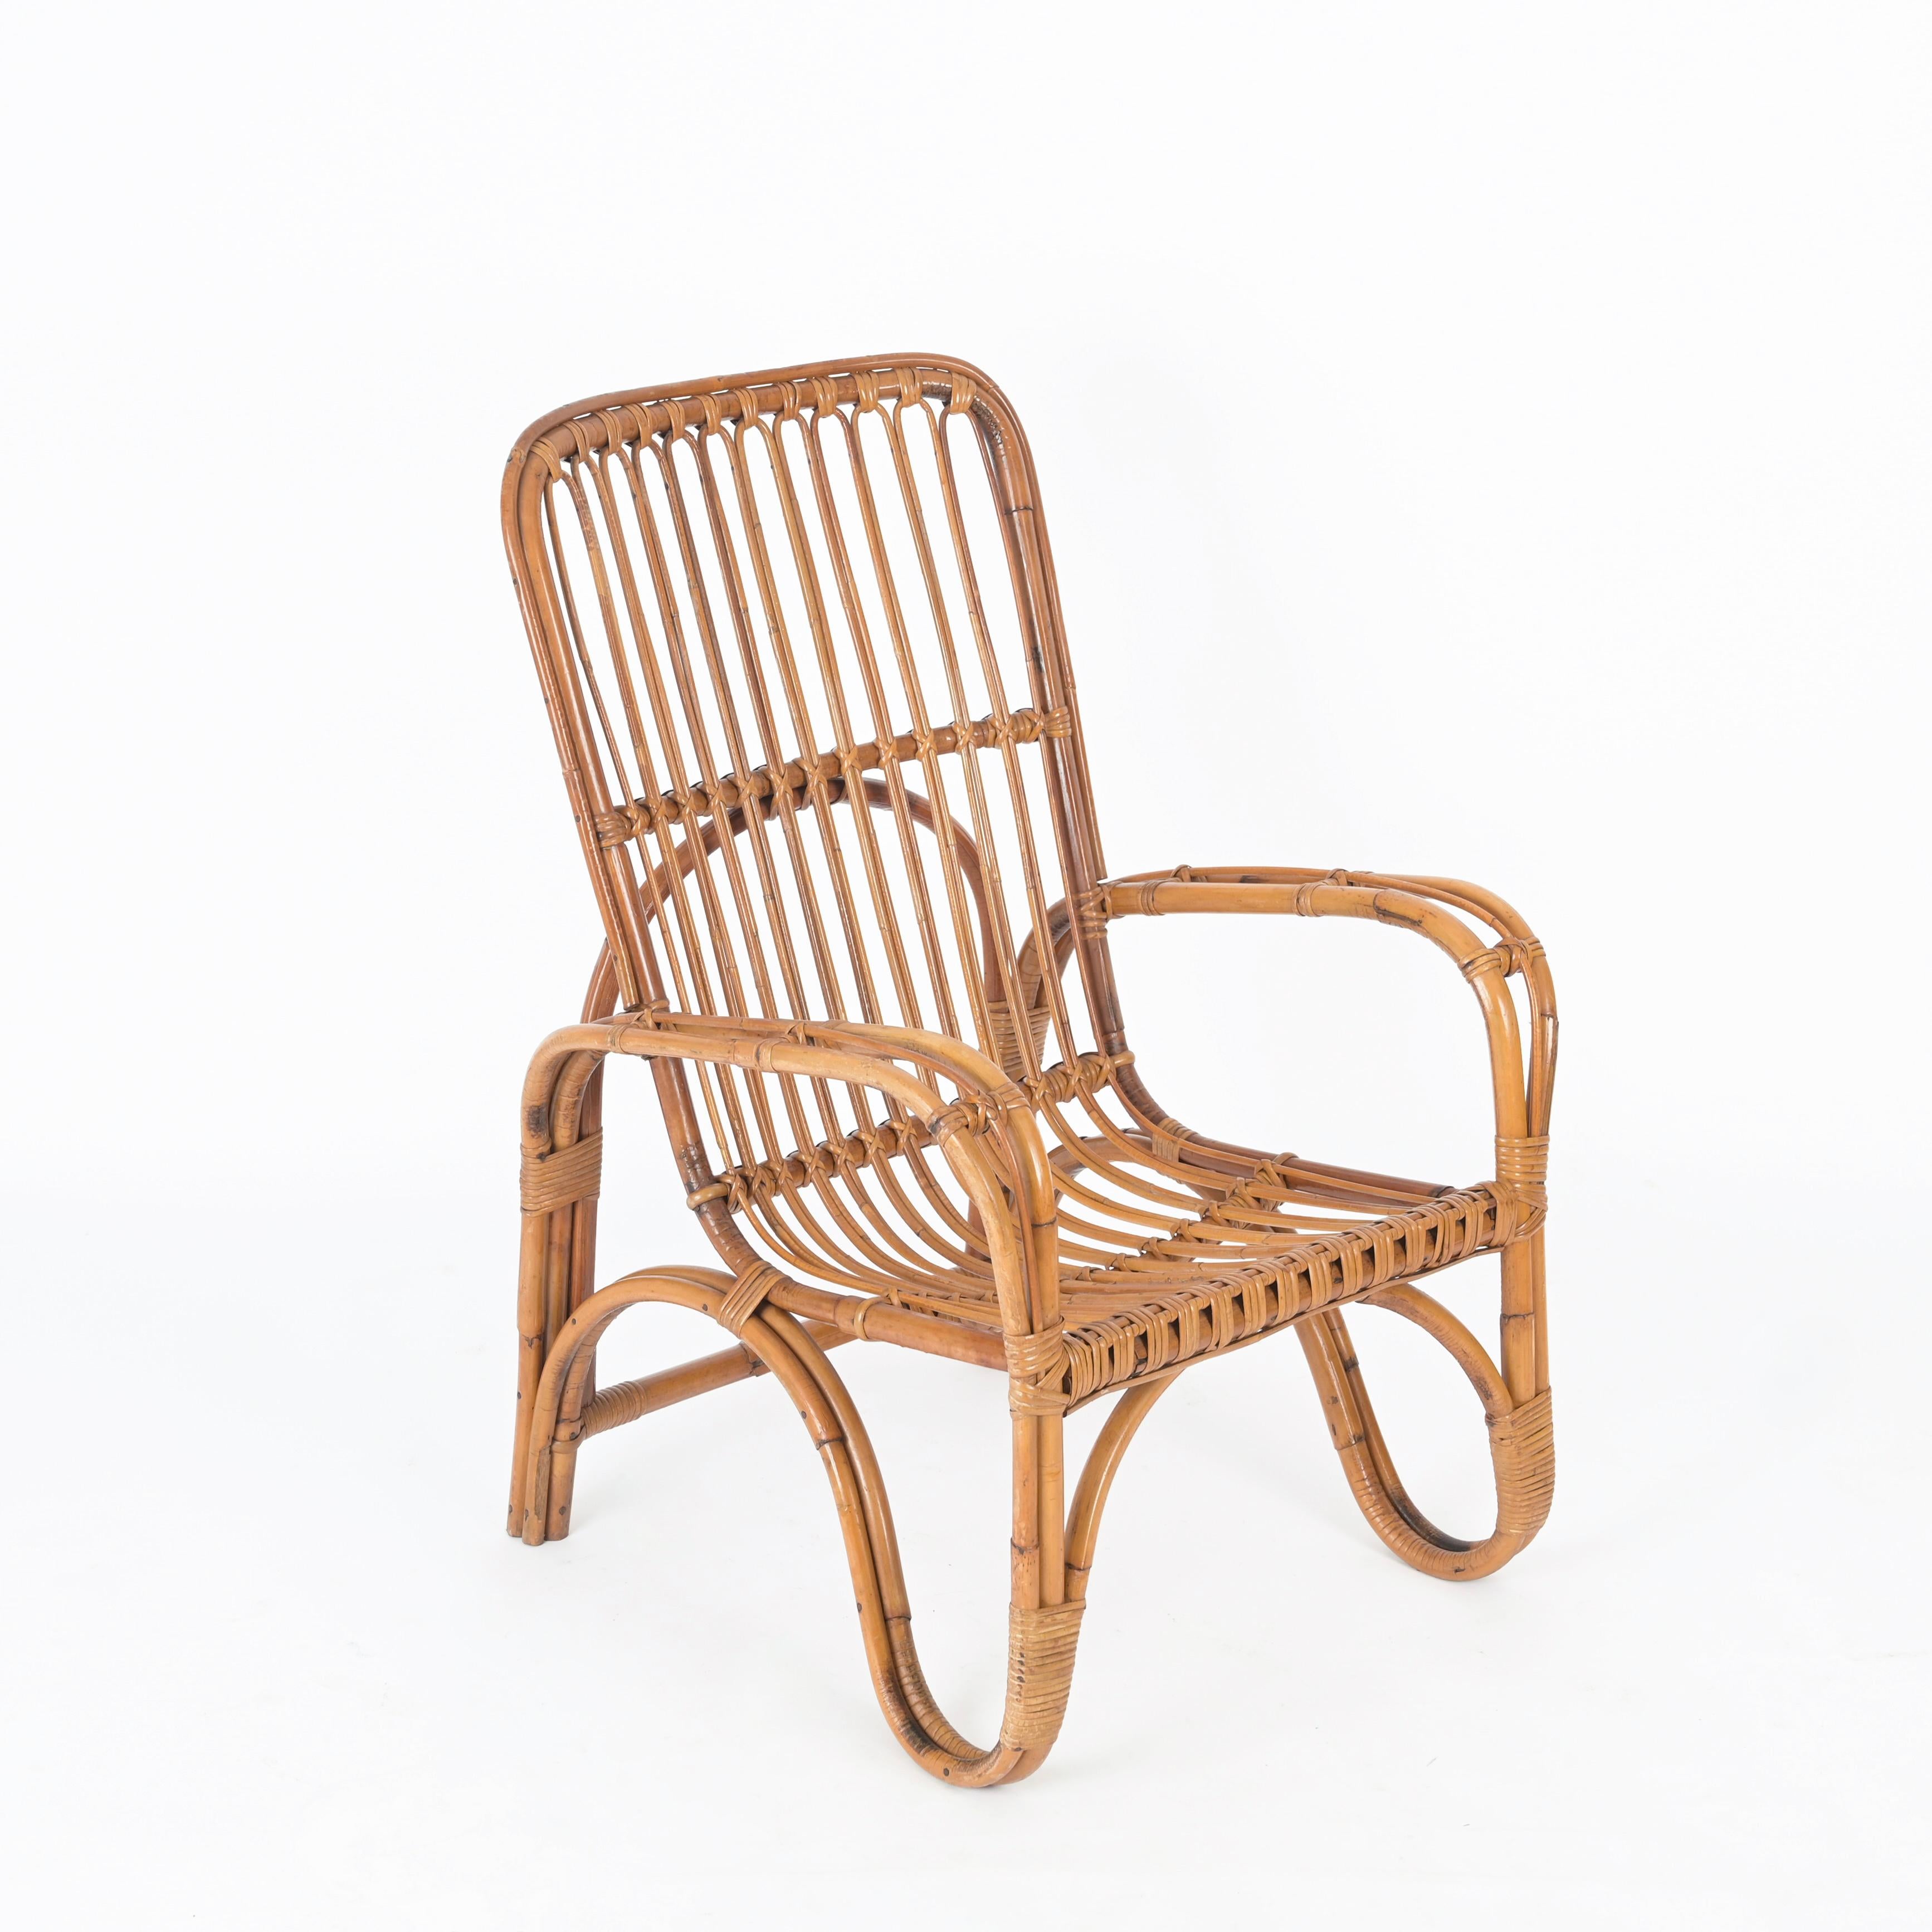 Pair of Midcentury Italian Armchairs in Rattan and Wicker, Tito Agnoli, 1960s For Sale 1